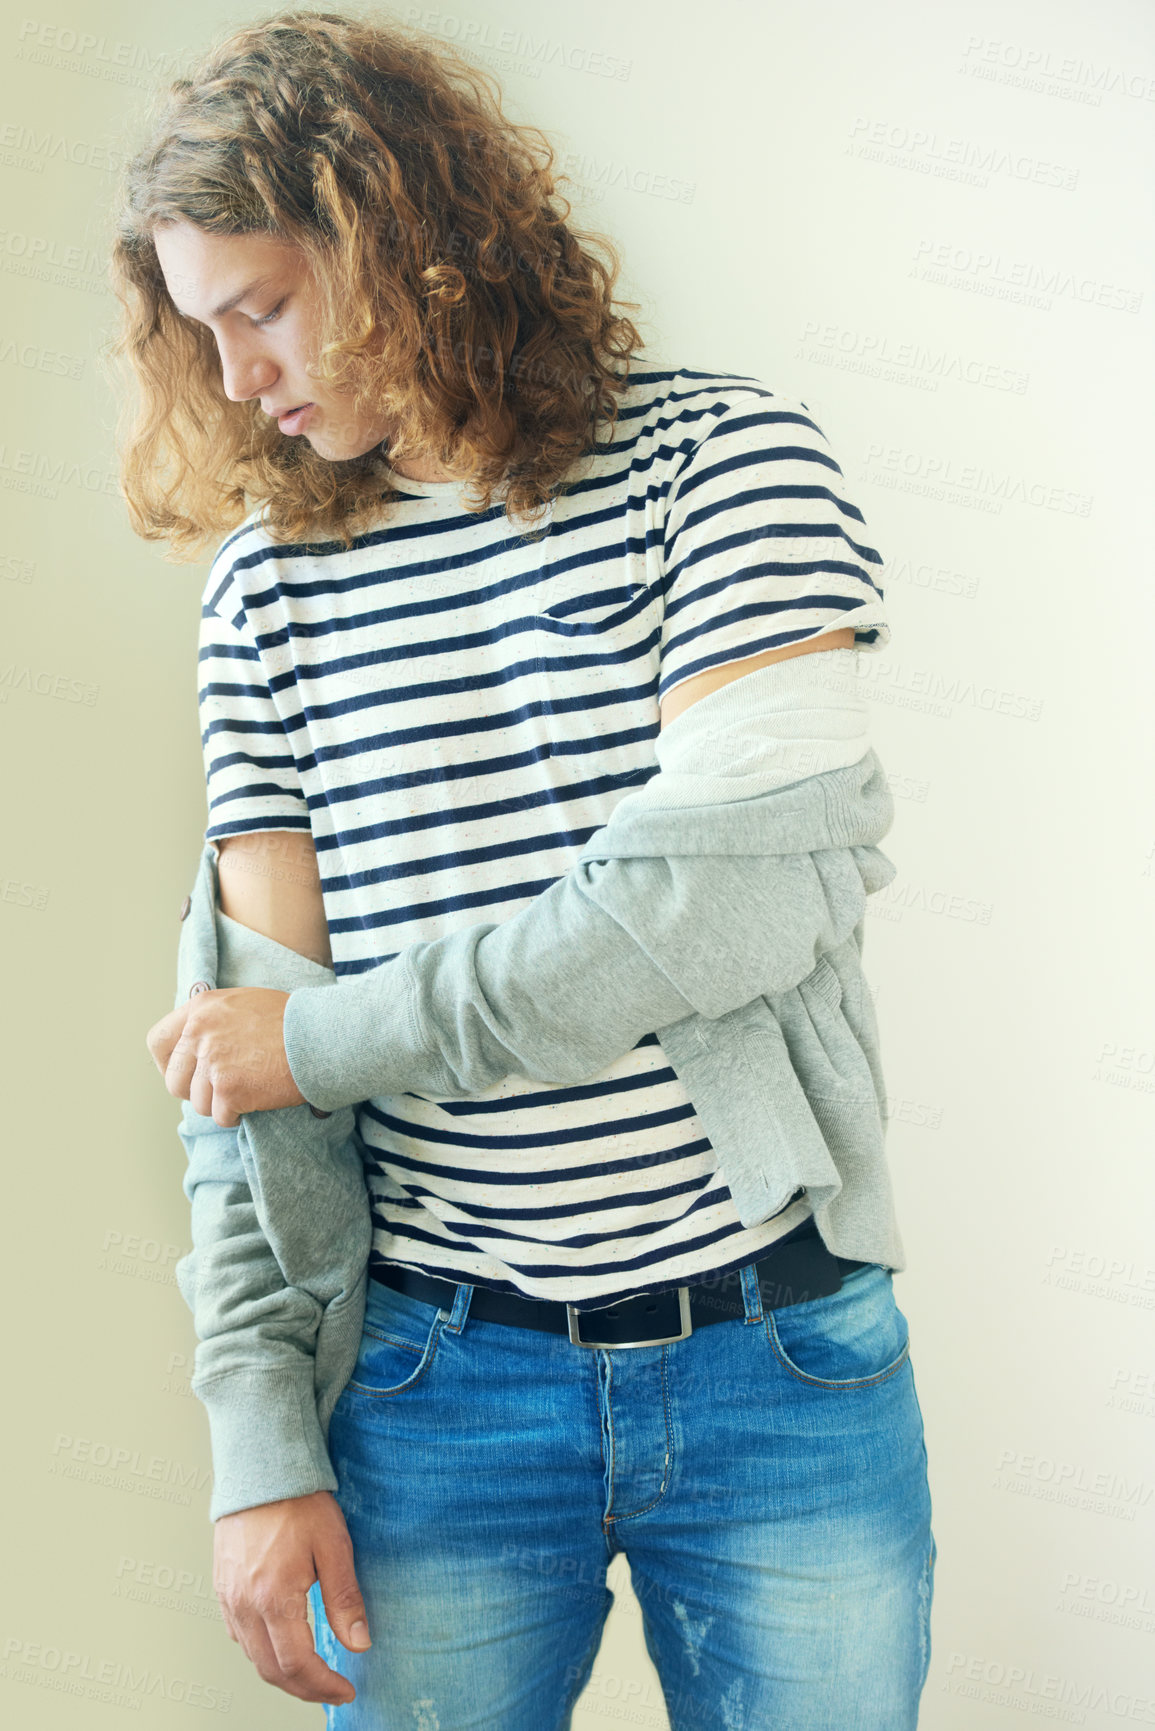 Buy stock photo Casual young man with long, curly hair